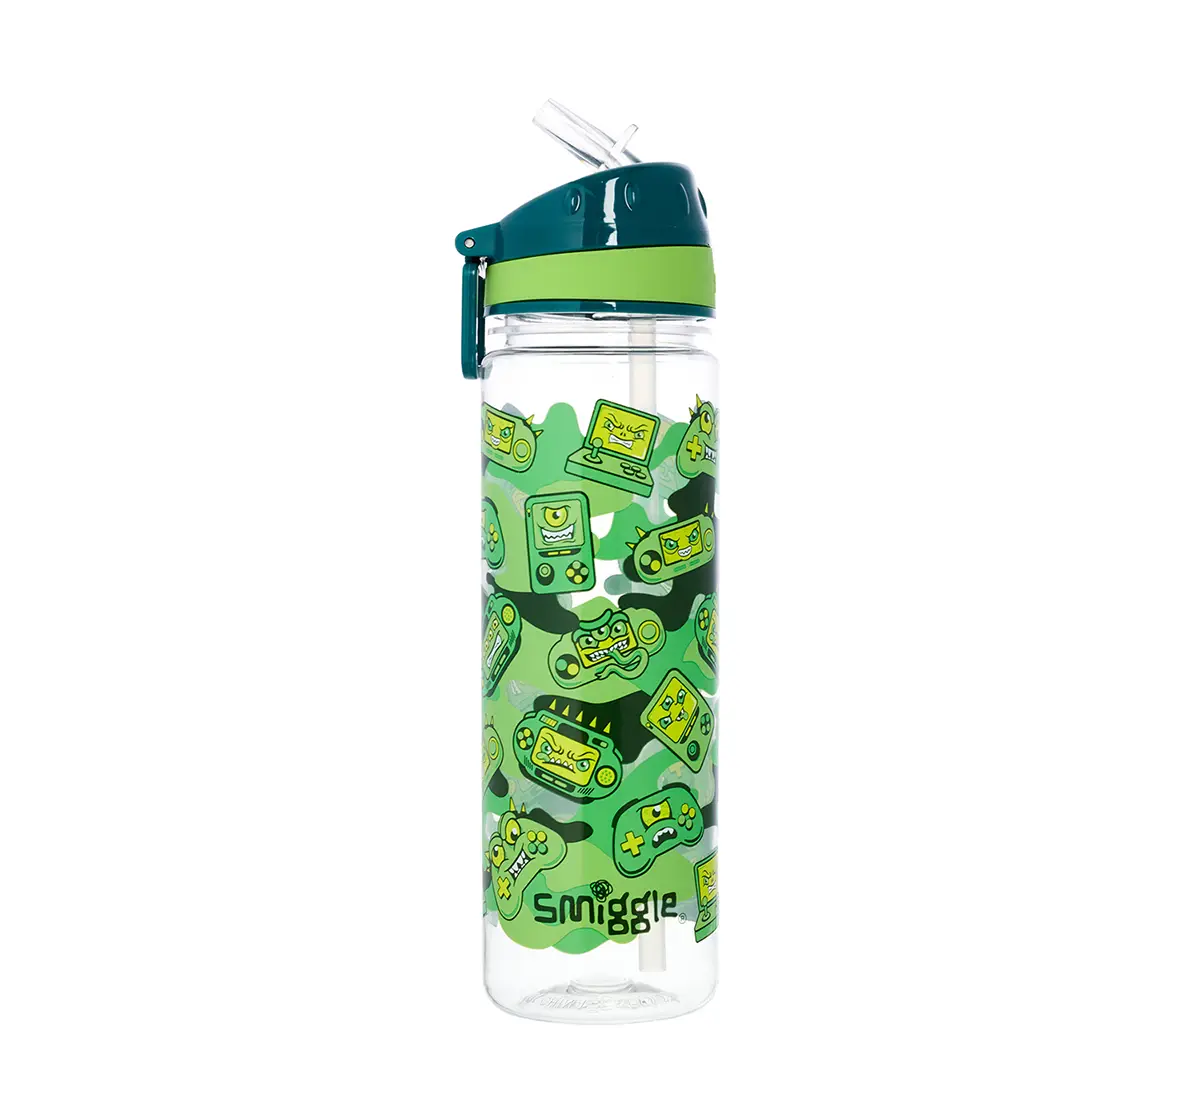  Smiggle Far Away Drink Bottle with Flip Top Spout - Gaming Print Bags for Kids age 3Y+ (Green)